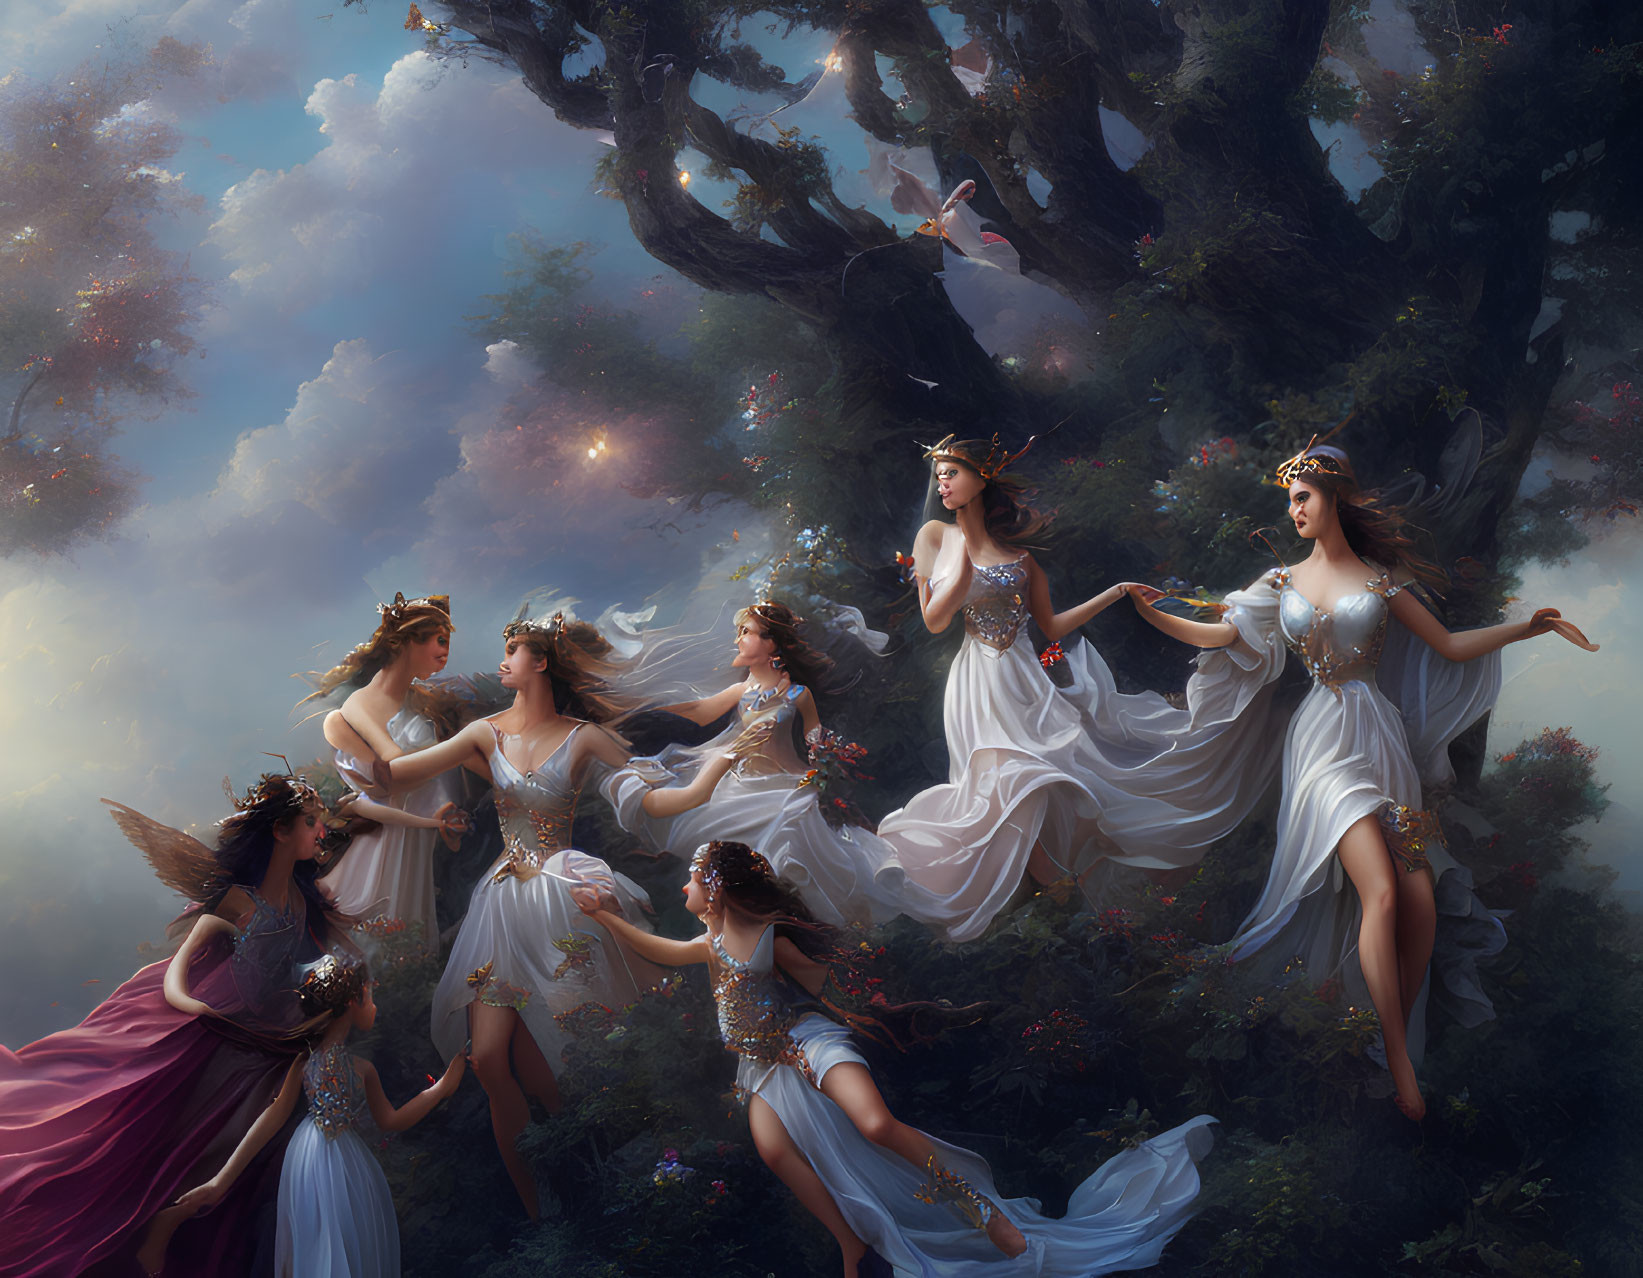 Graceful winged beings in flowing gowns dance in mystical forest.